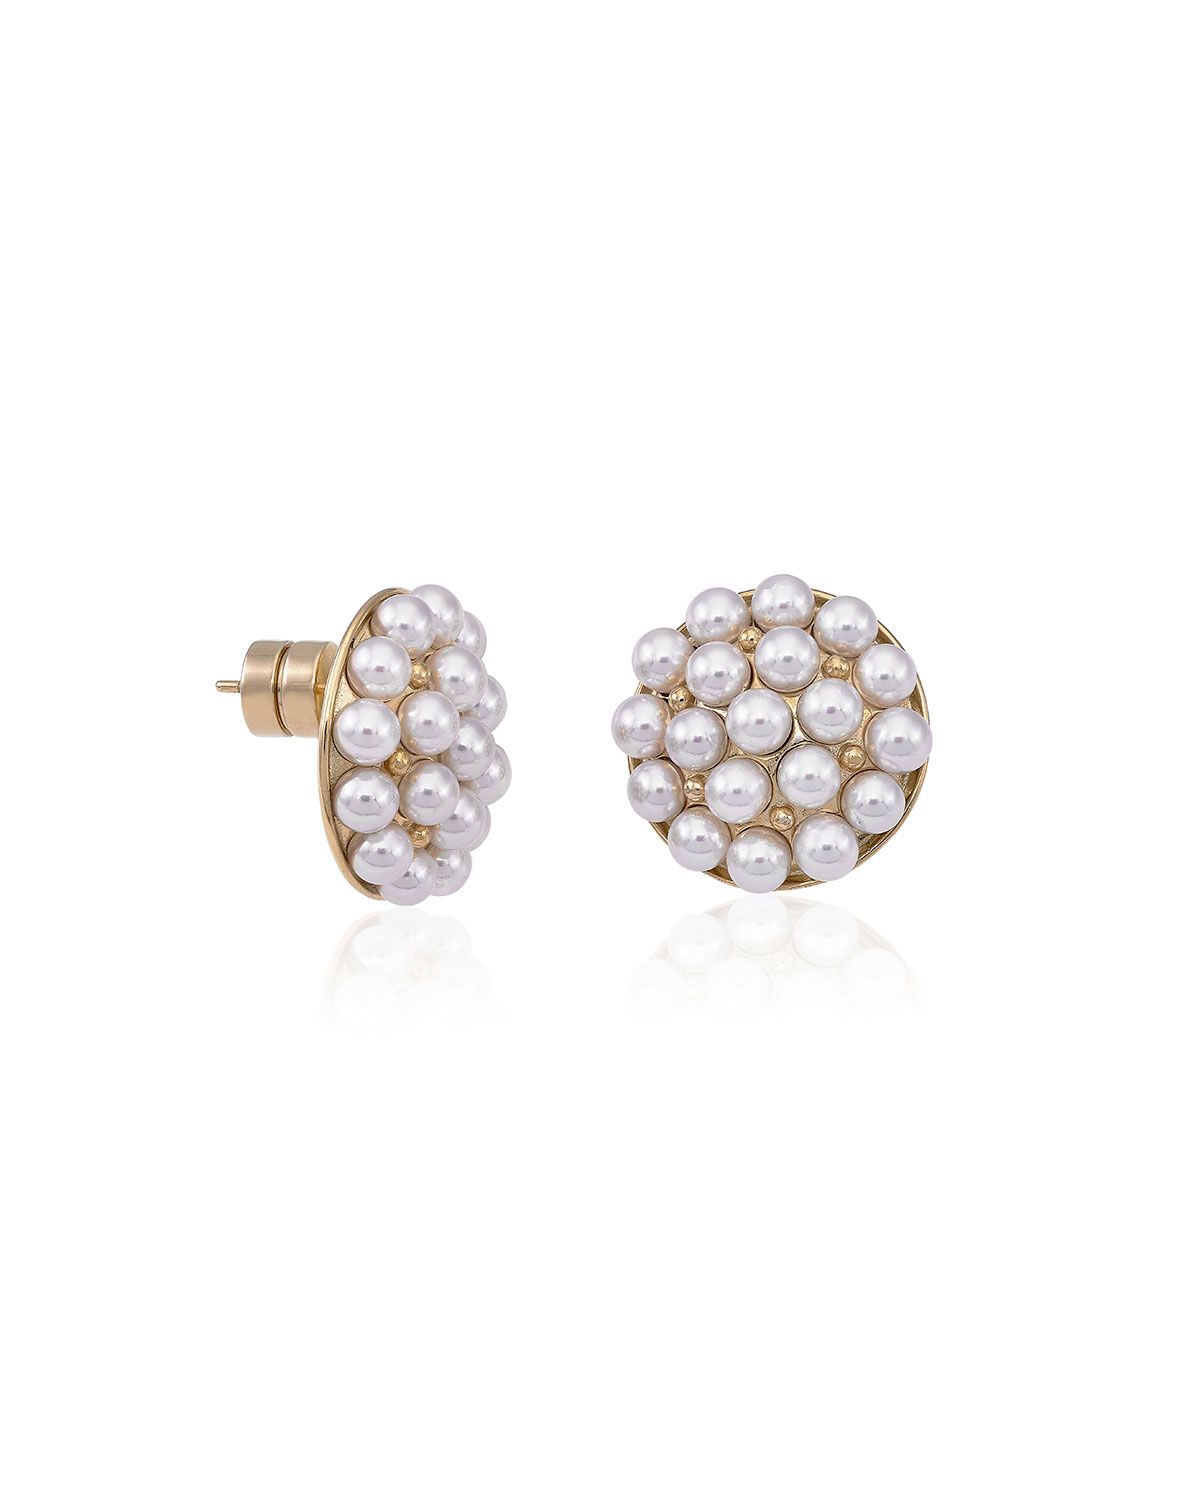 4mm Multi-Pearly Post Earrings, Pearl/Gold | Neiman Marcus